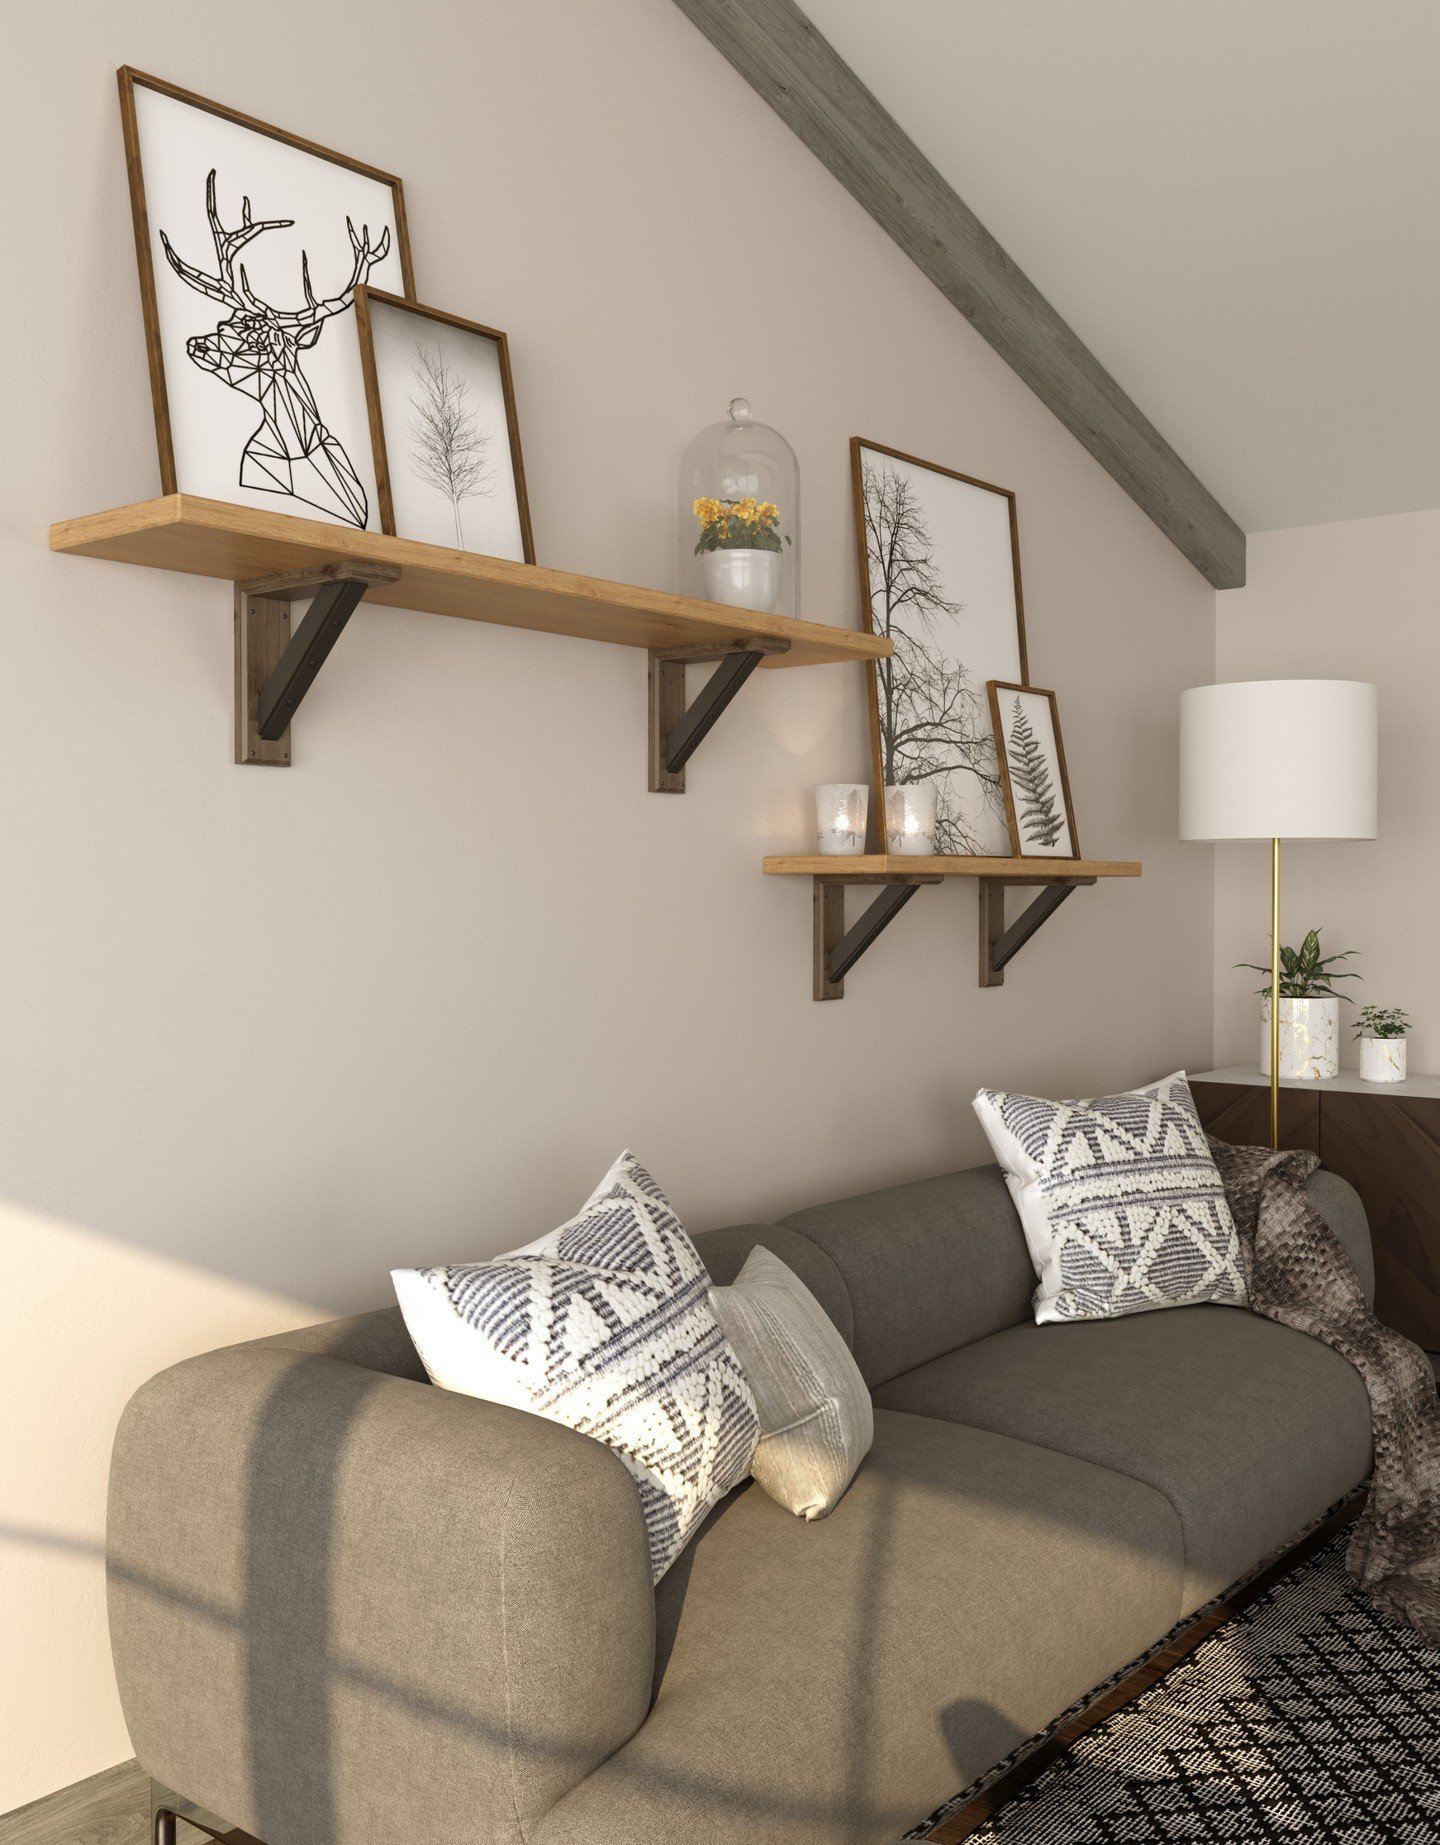 Our ambrosia maple brackets with metal inserts create a rustic, cabin vibe to your home.
-
https://www.ornamental.com/brackets-corbels/0001wm-transitional-shelf-support-with-black
-
#OrnamentalBuild #LoveTheRoom #InteriorDesign #DecotativeMoulding #L